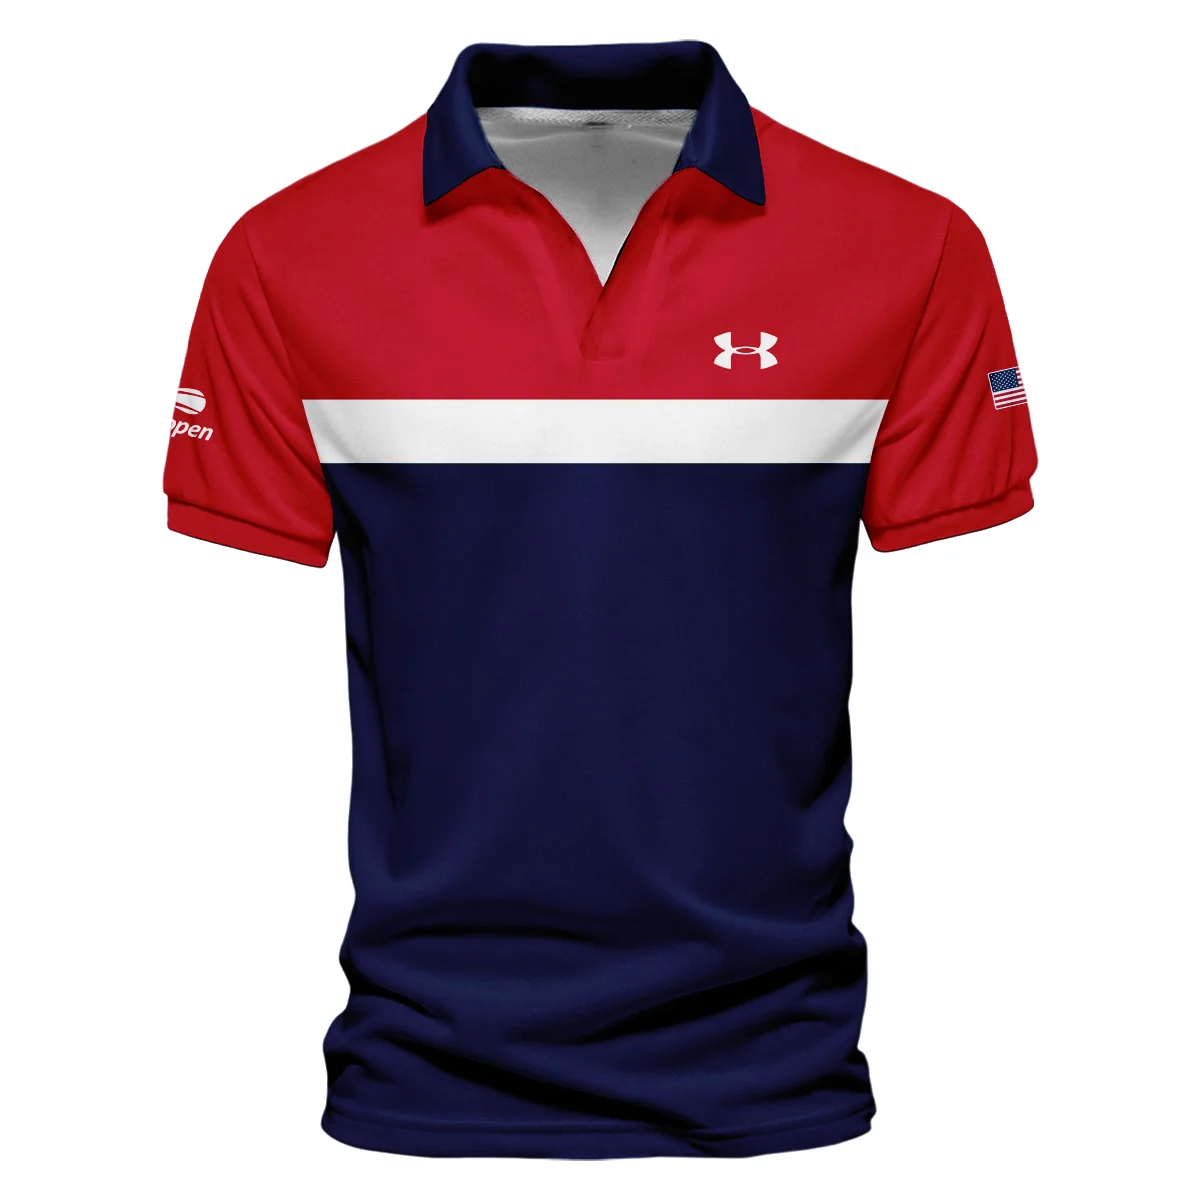 Under Armour Blue Red White Background US Open Tennis Champions Vneck Polo Shirt Style Classic Polo Shirt For Men